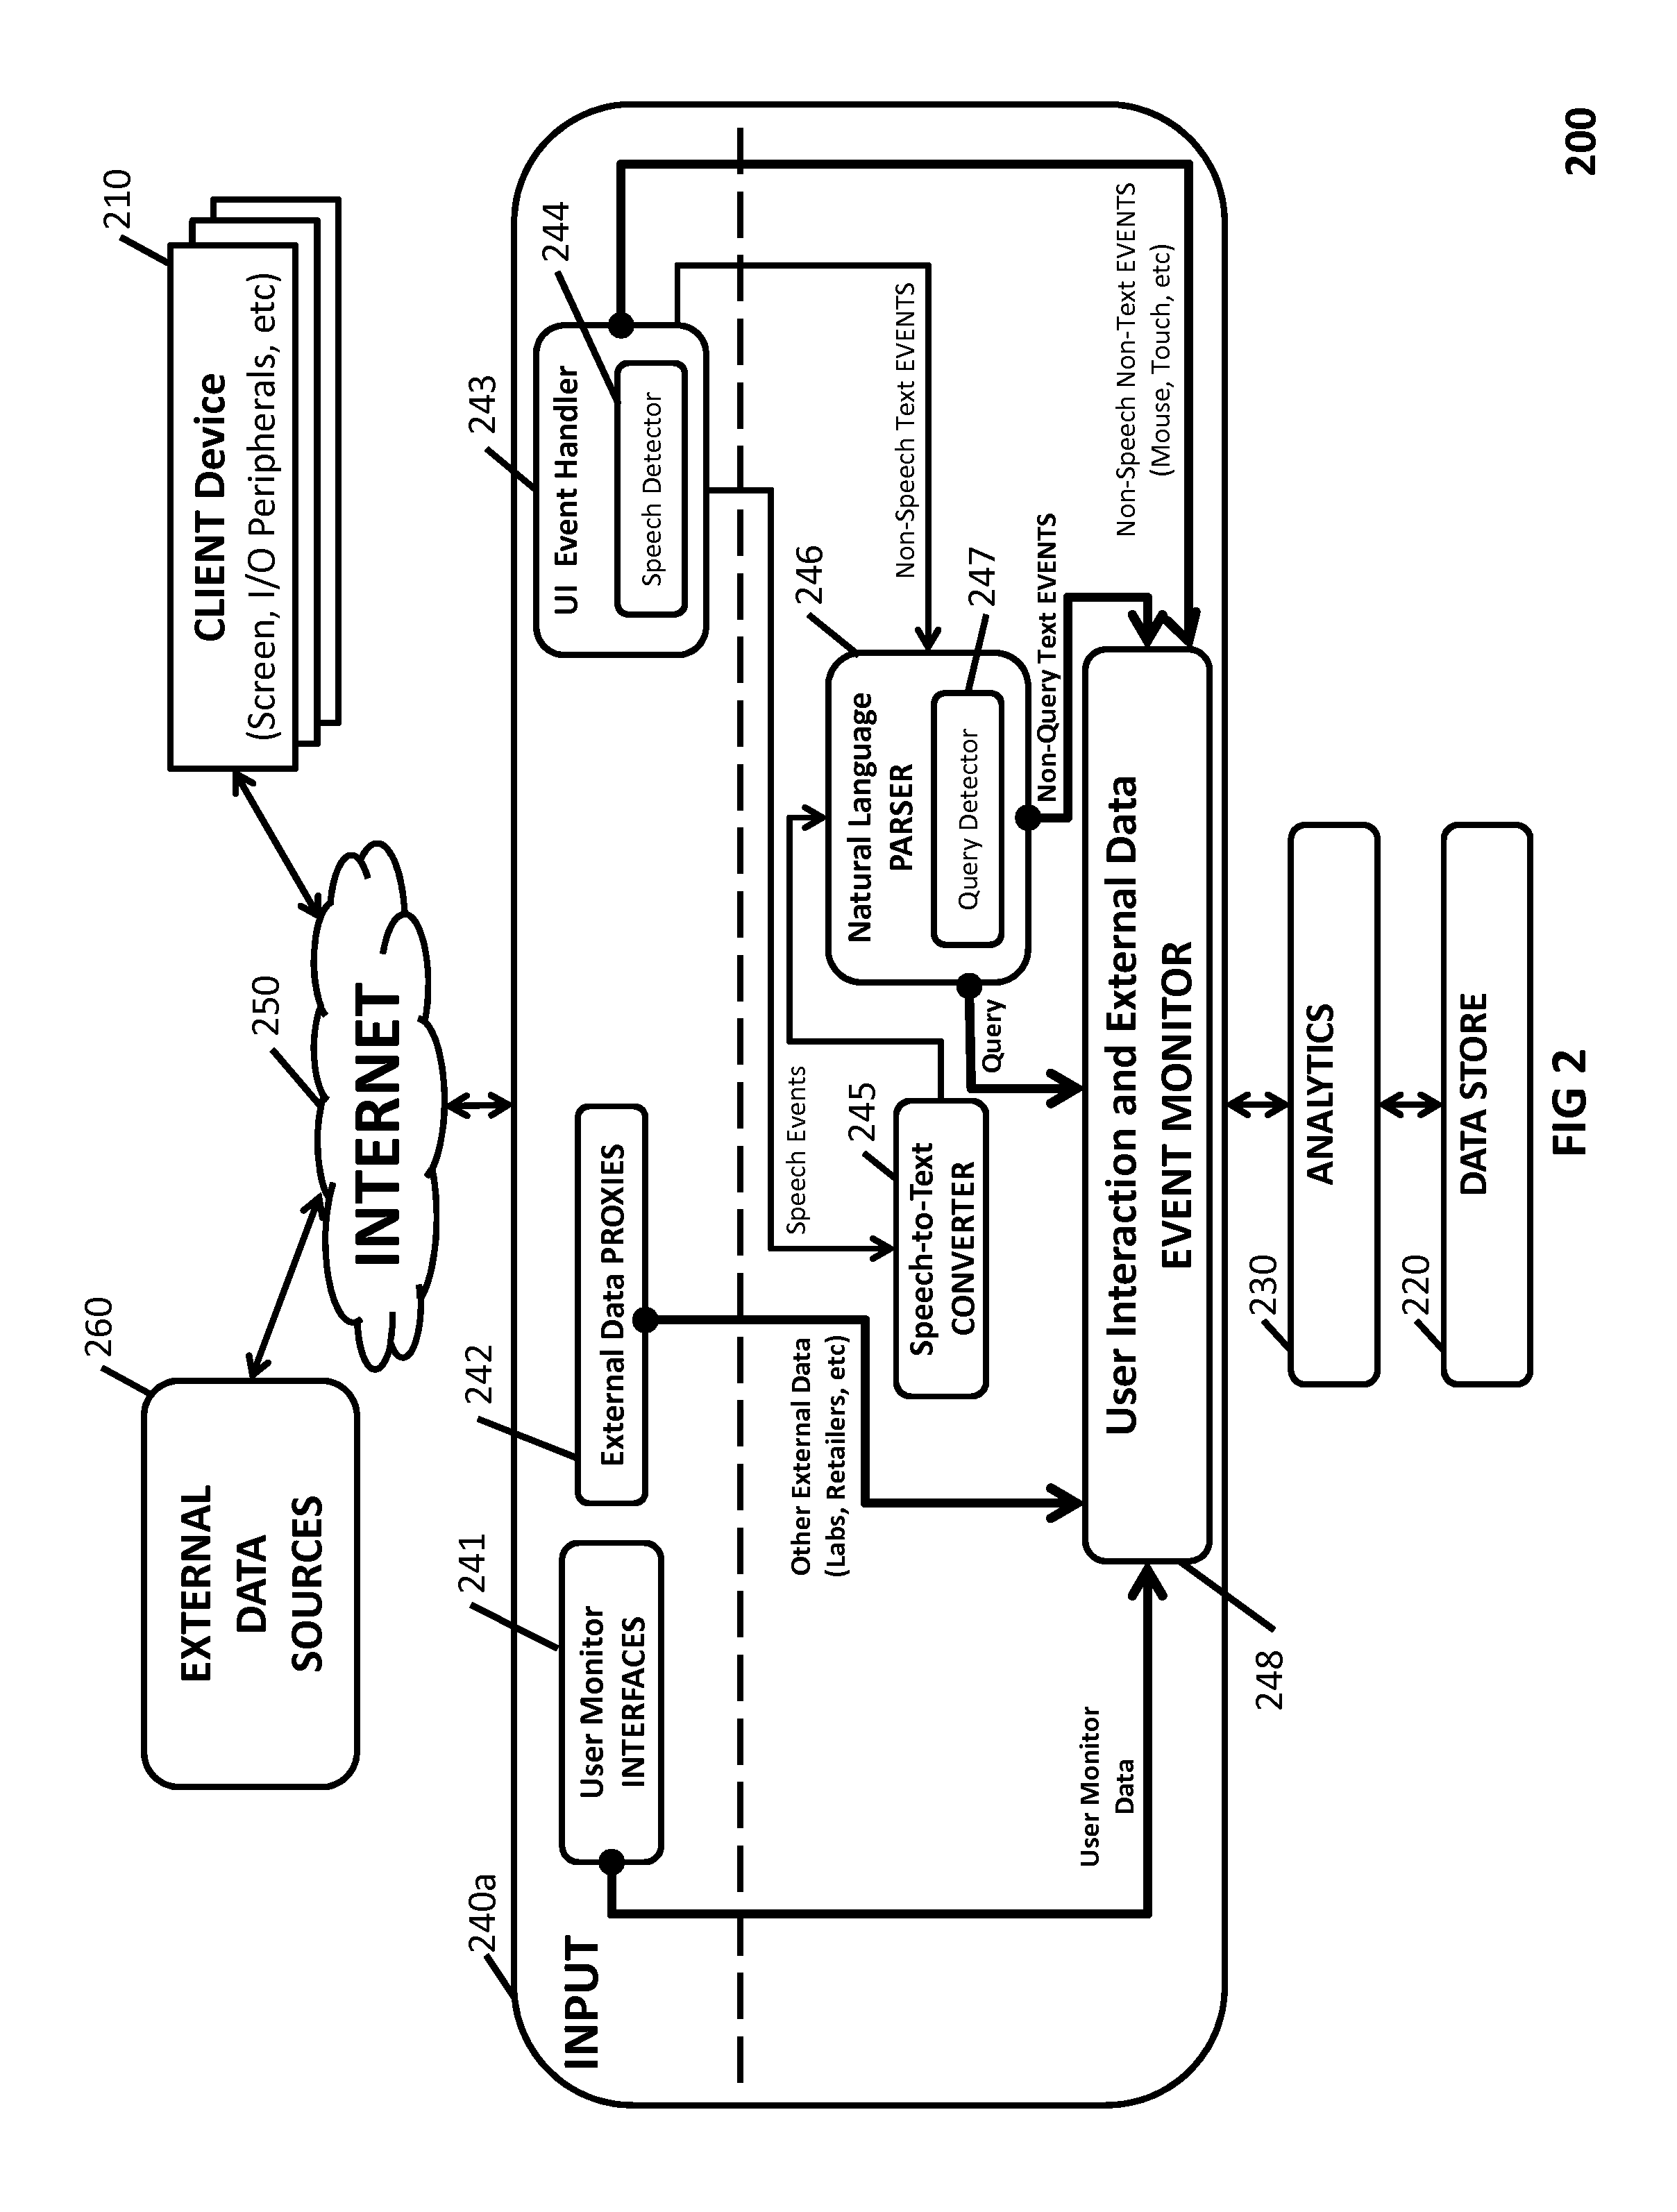 Systems and Methods for Facilitating Integrated Behavioral Support